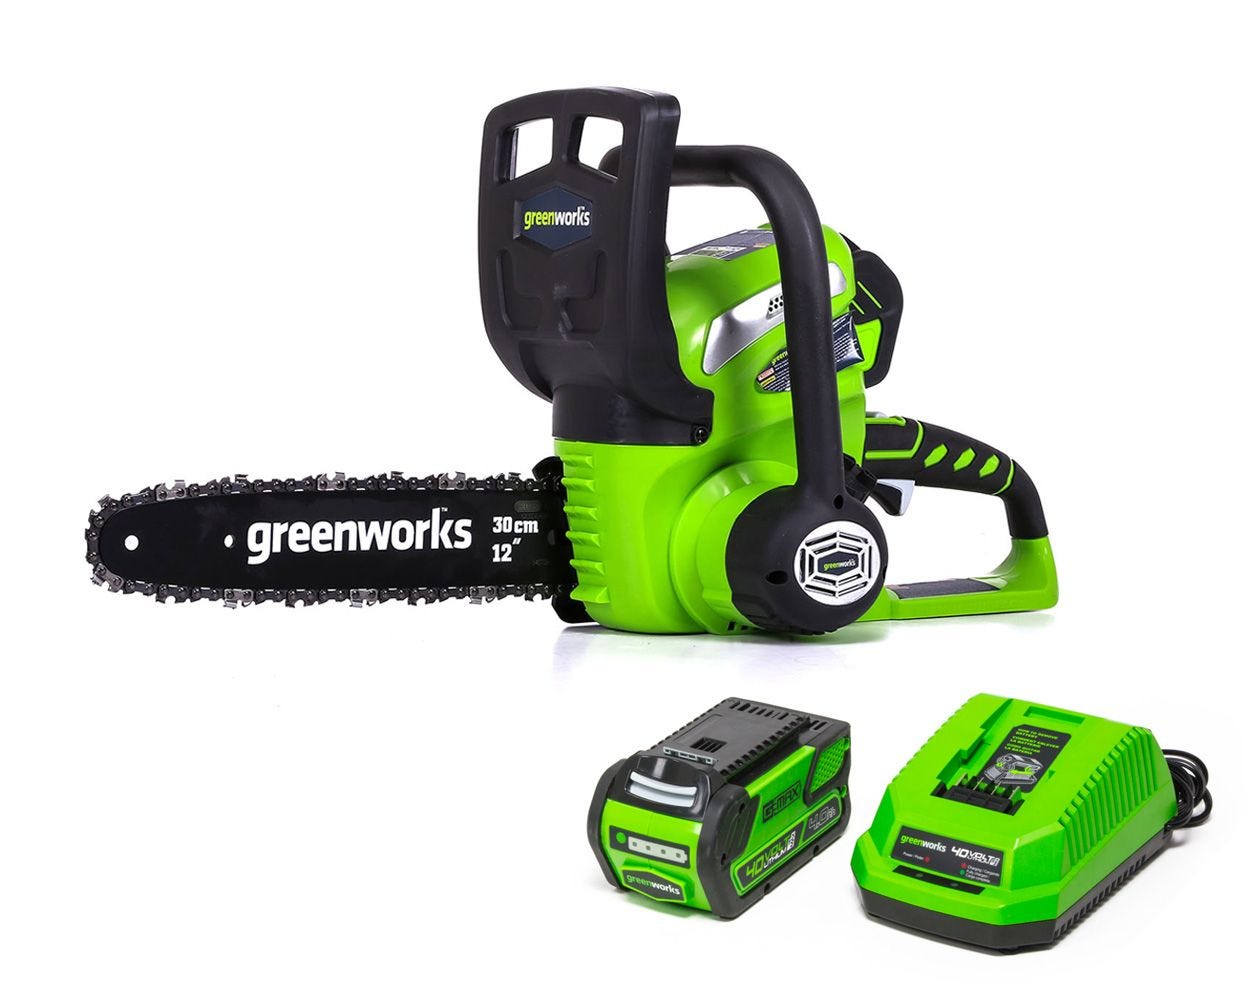 Greenworks 40V 12" Cordless Chainsaw with 2.0 Ah Battery & Charger, 20262 - image 1 of 14